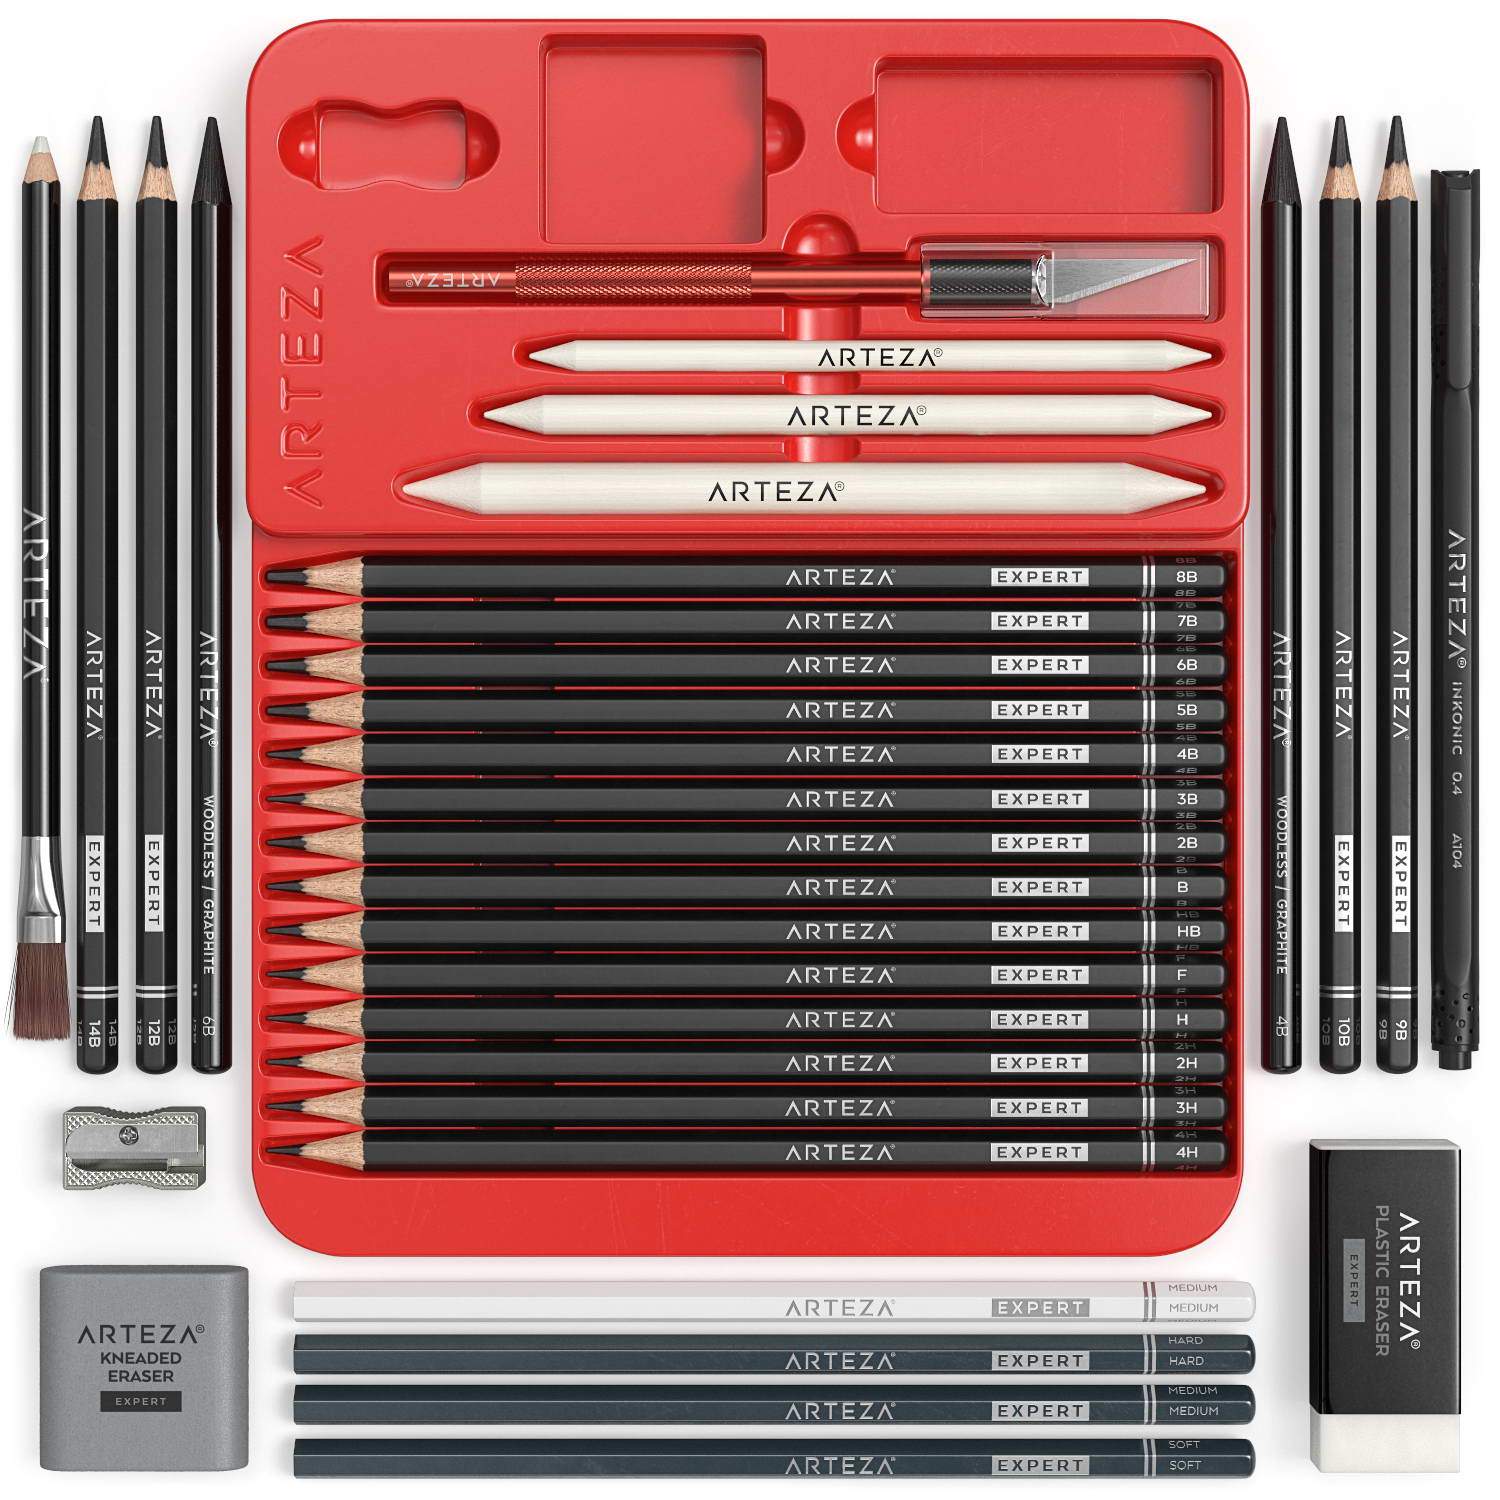 Sketch Pencils Set for drawing by my art tools,10 Piece